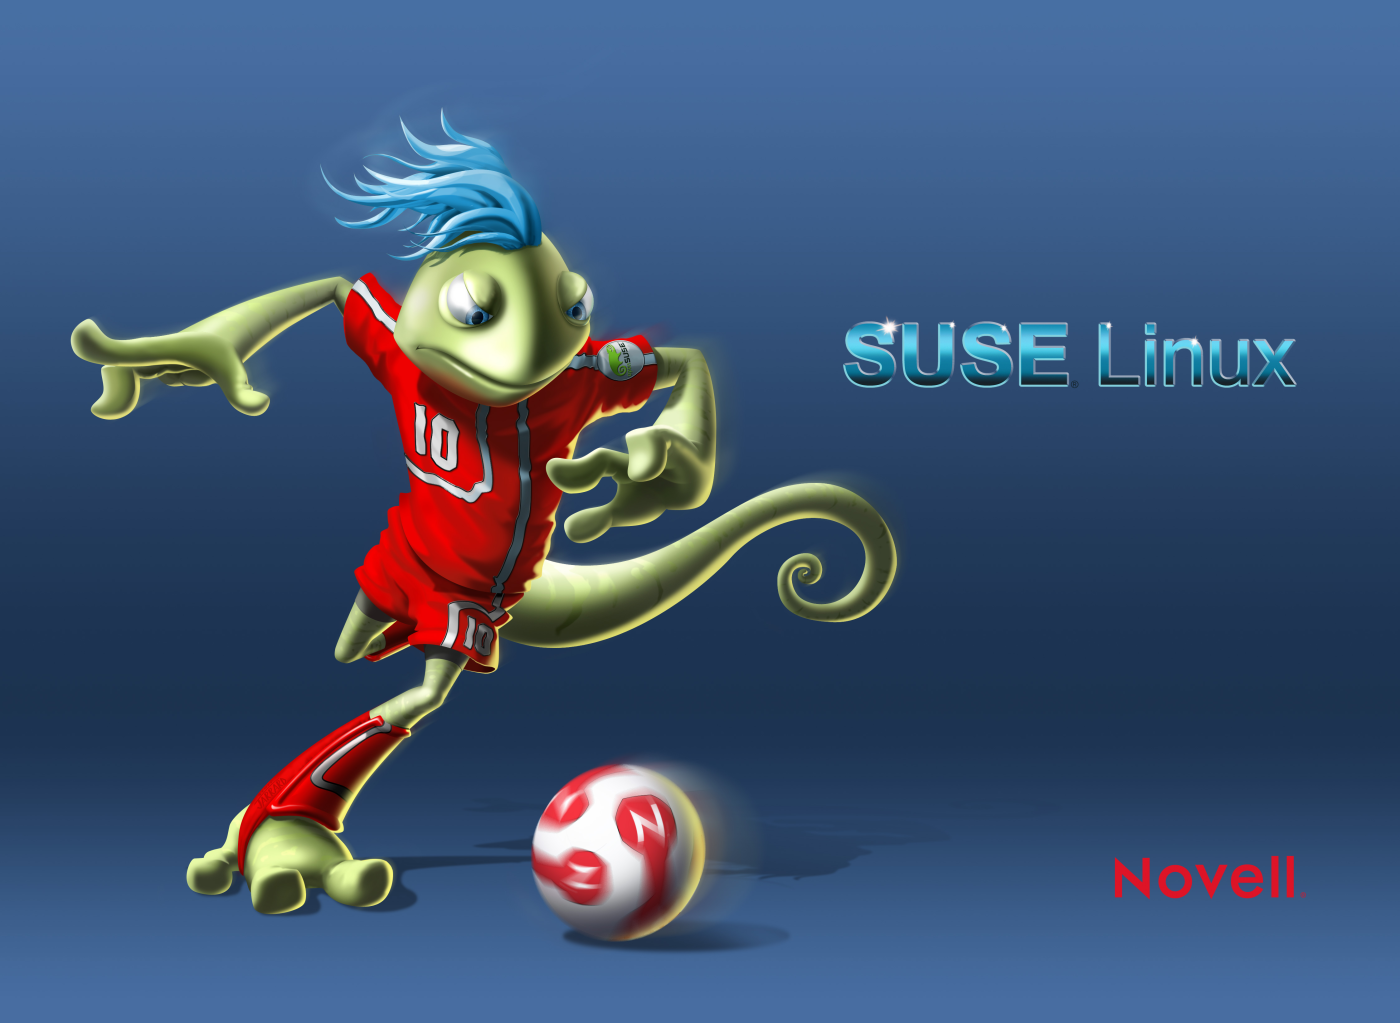 SUSE Wallpaper #1. Posted on August 13, 2006 by Ted Haeger